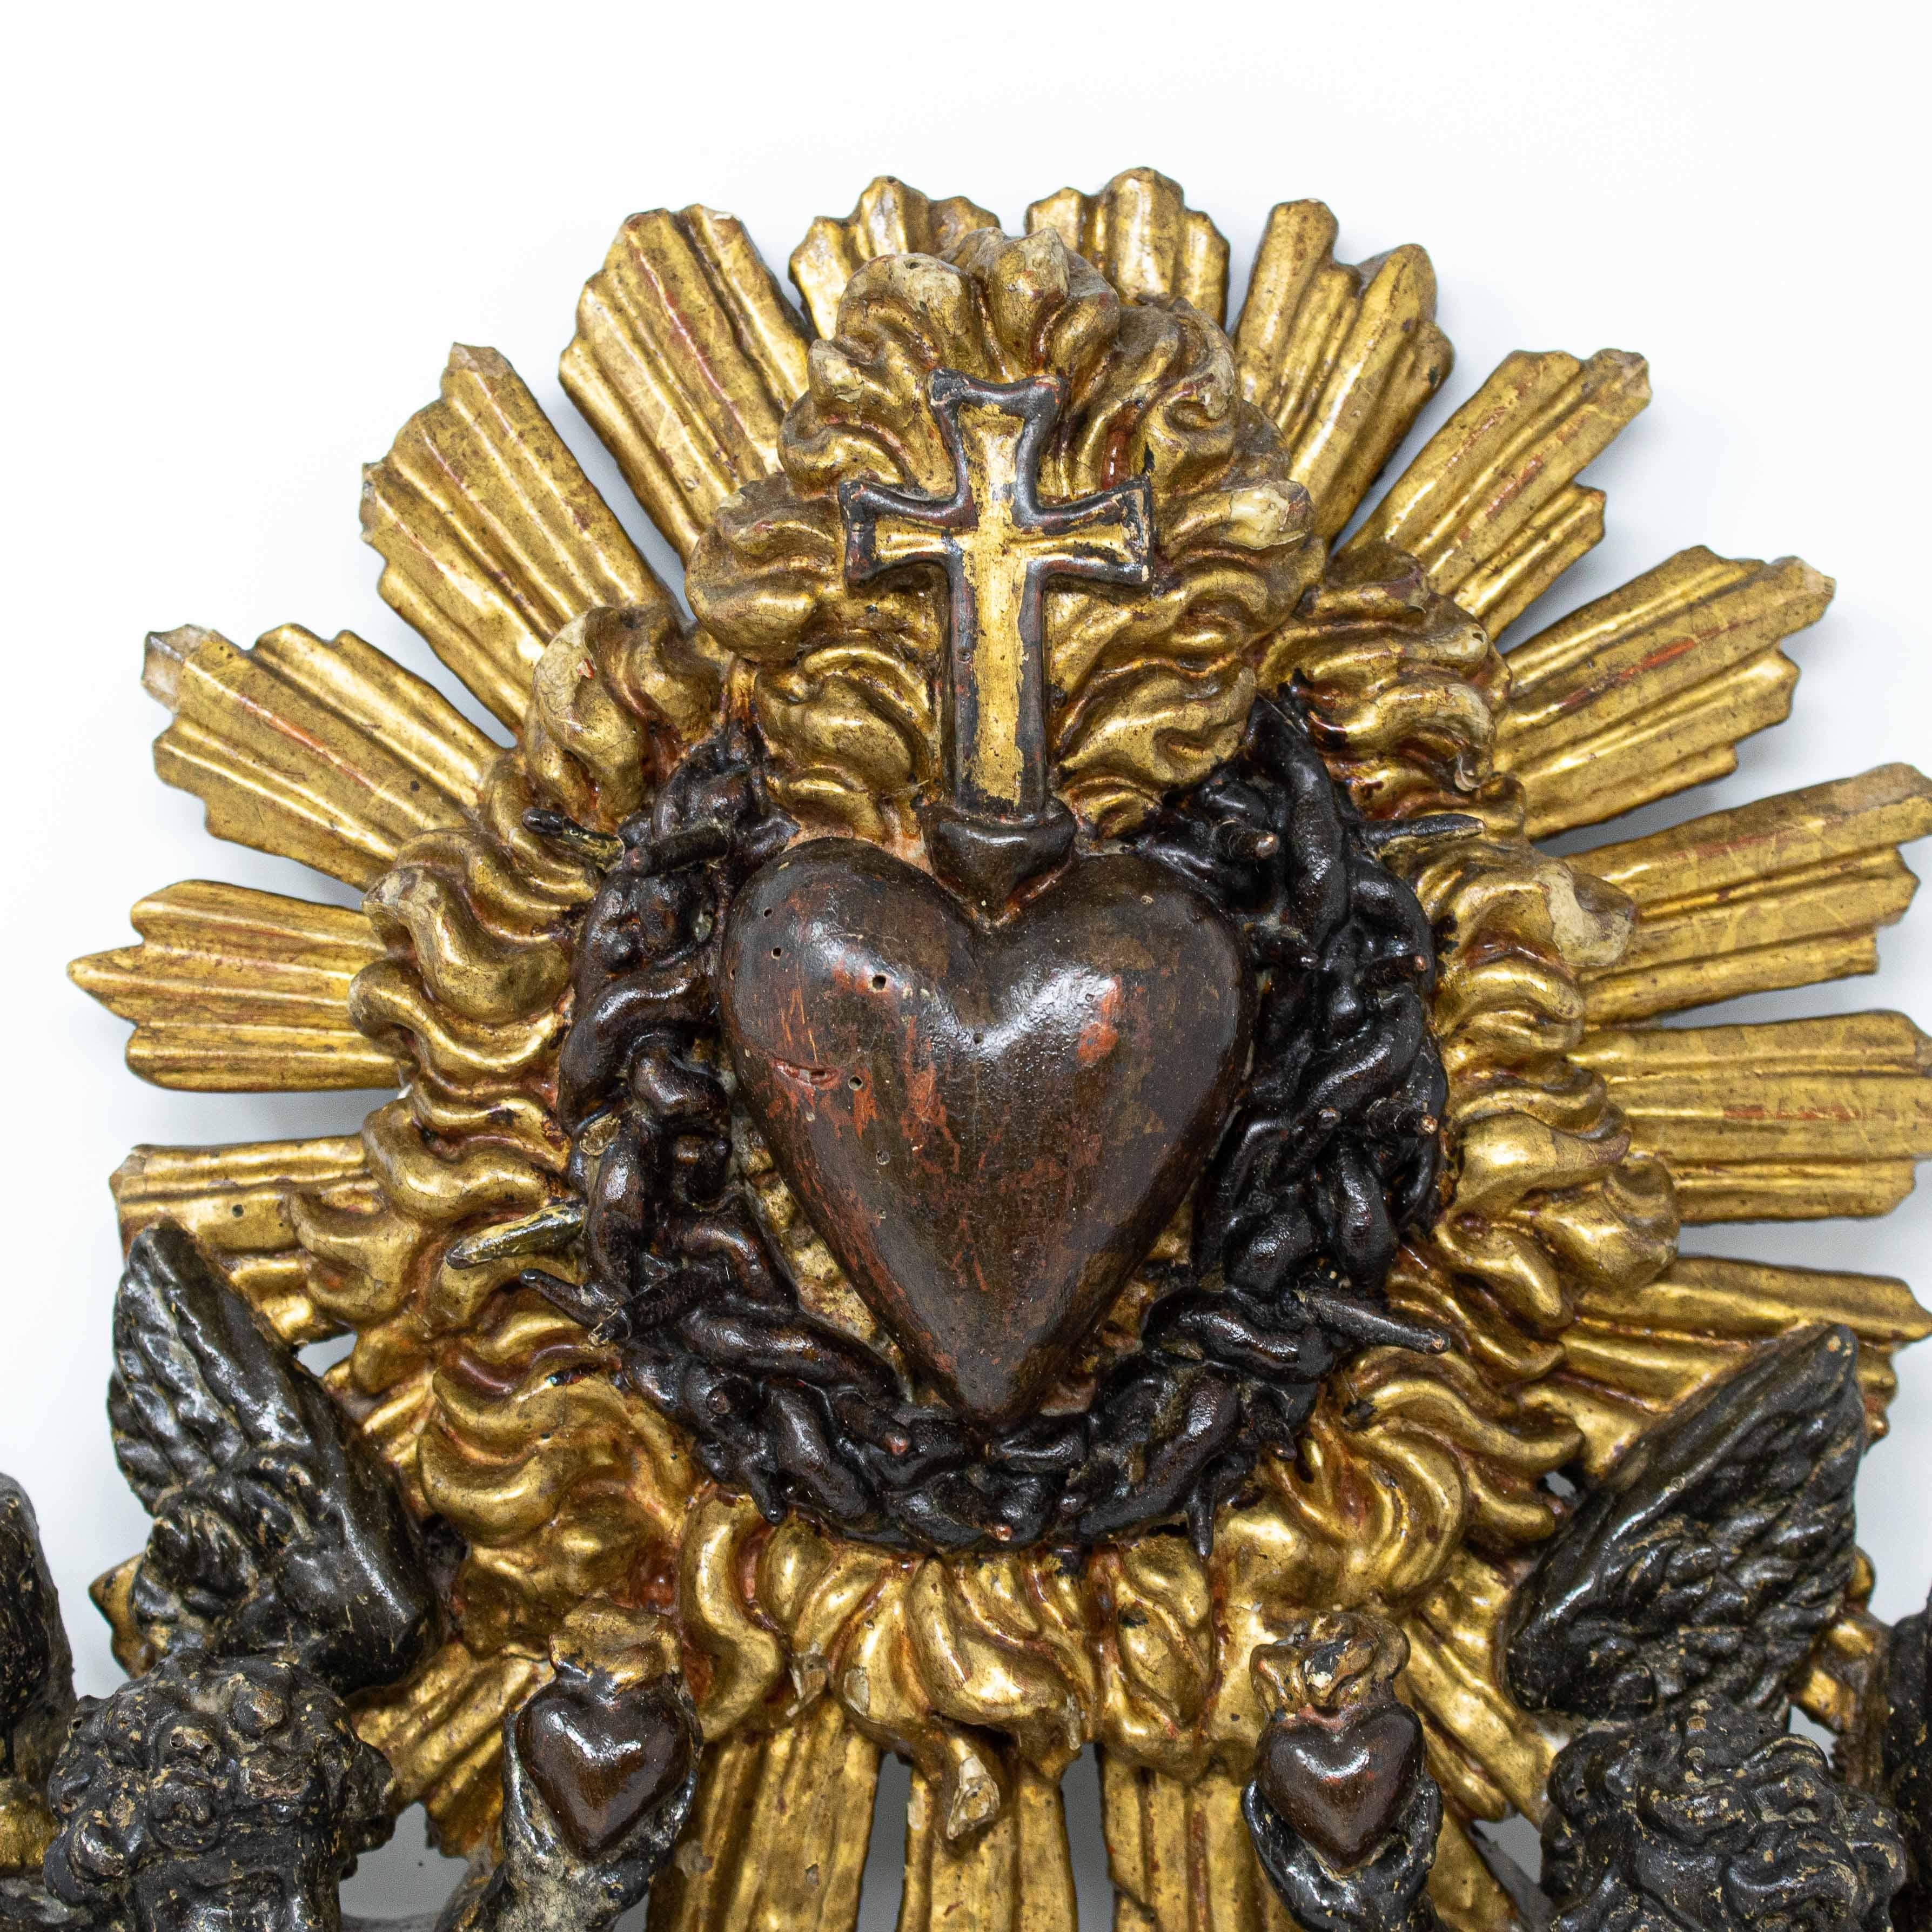 17th century
Adoration of the Sacred Heart of Jesus
Carved, ebonized and gilded wood, 40 x 31 cm

The first mention of the Heart of Jesus occurs in the Gospel according to Matthew (11: 28-29): 